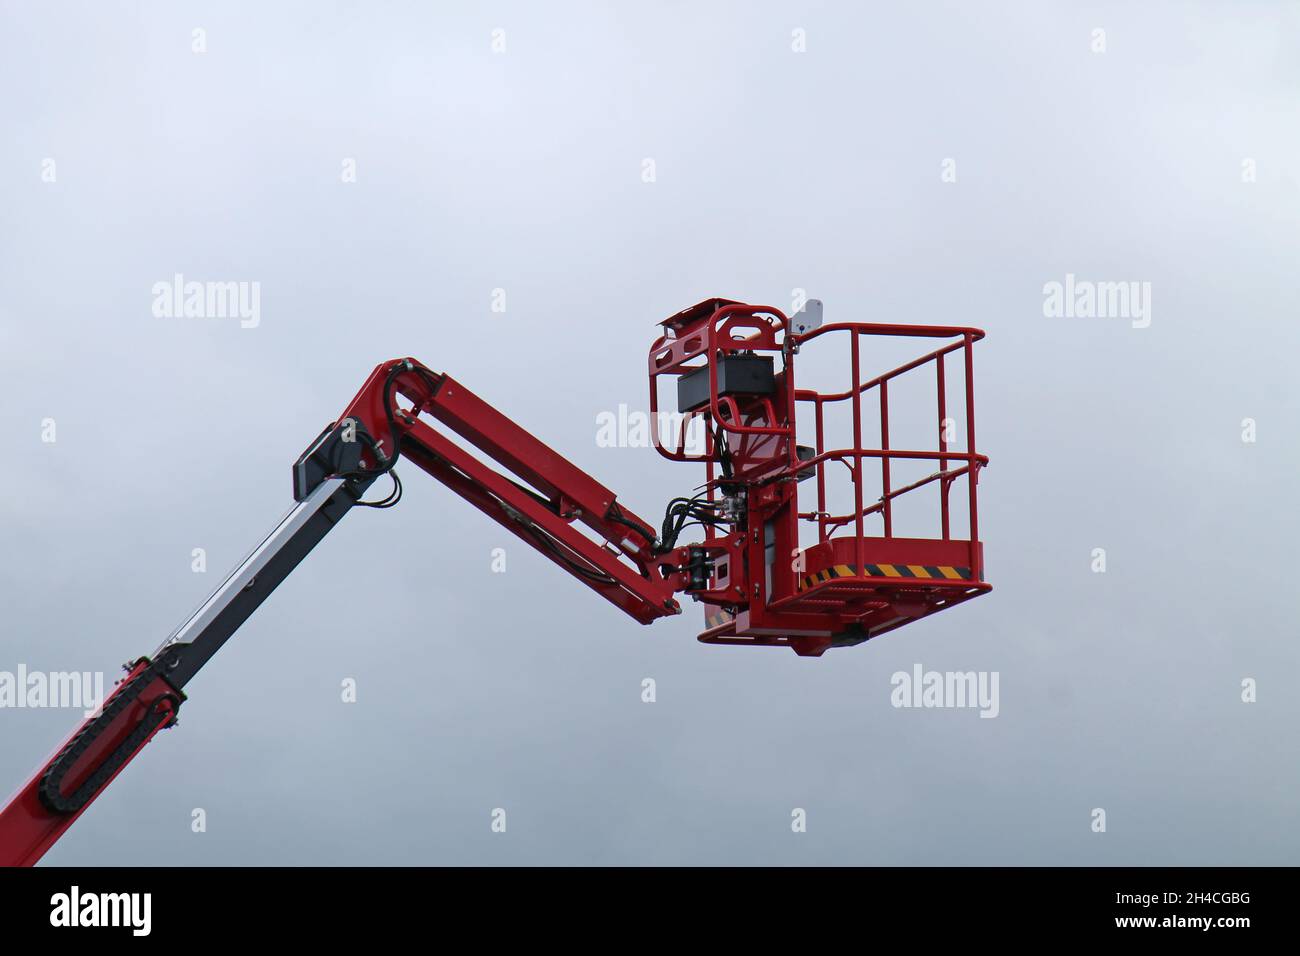 The Telescopic Arm and Cage of a Cherry Picker Vehicle. Stock Photo